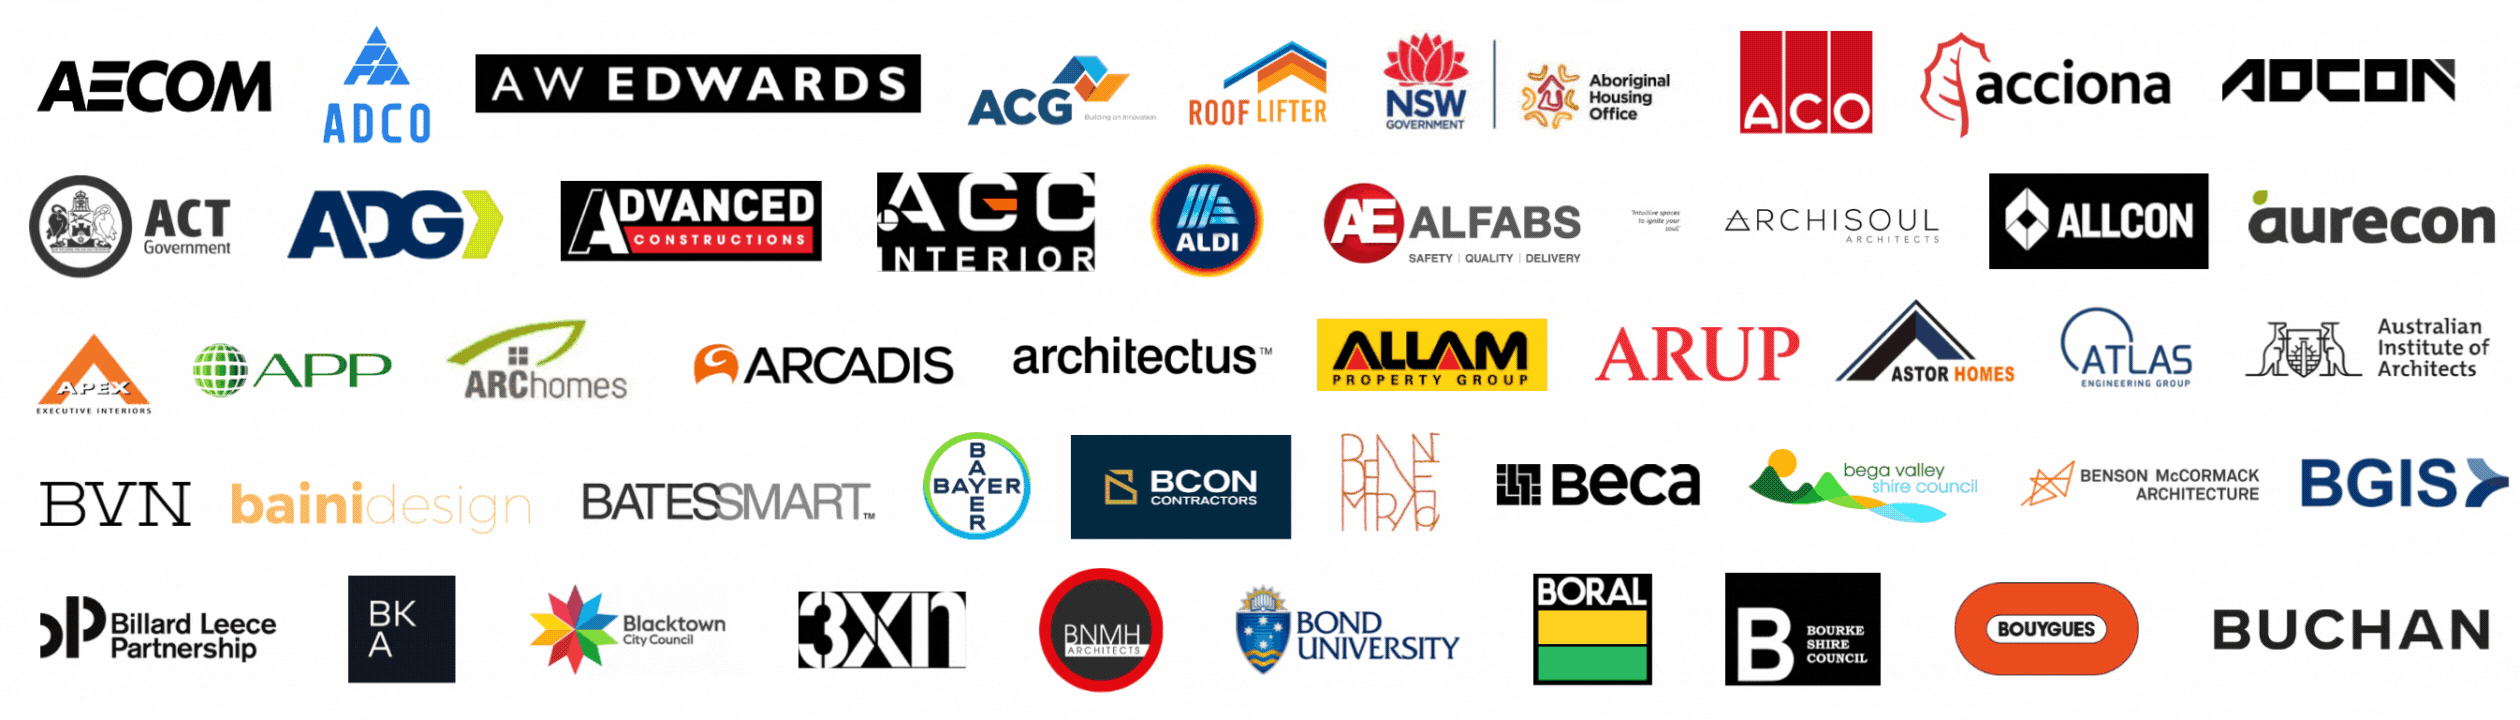 Sydney Build Event Attendees from these companies